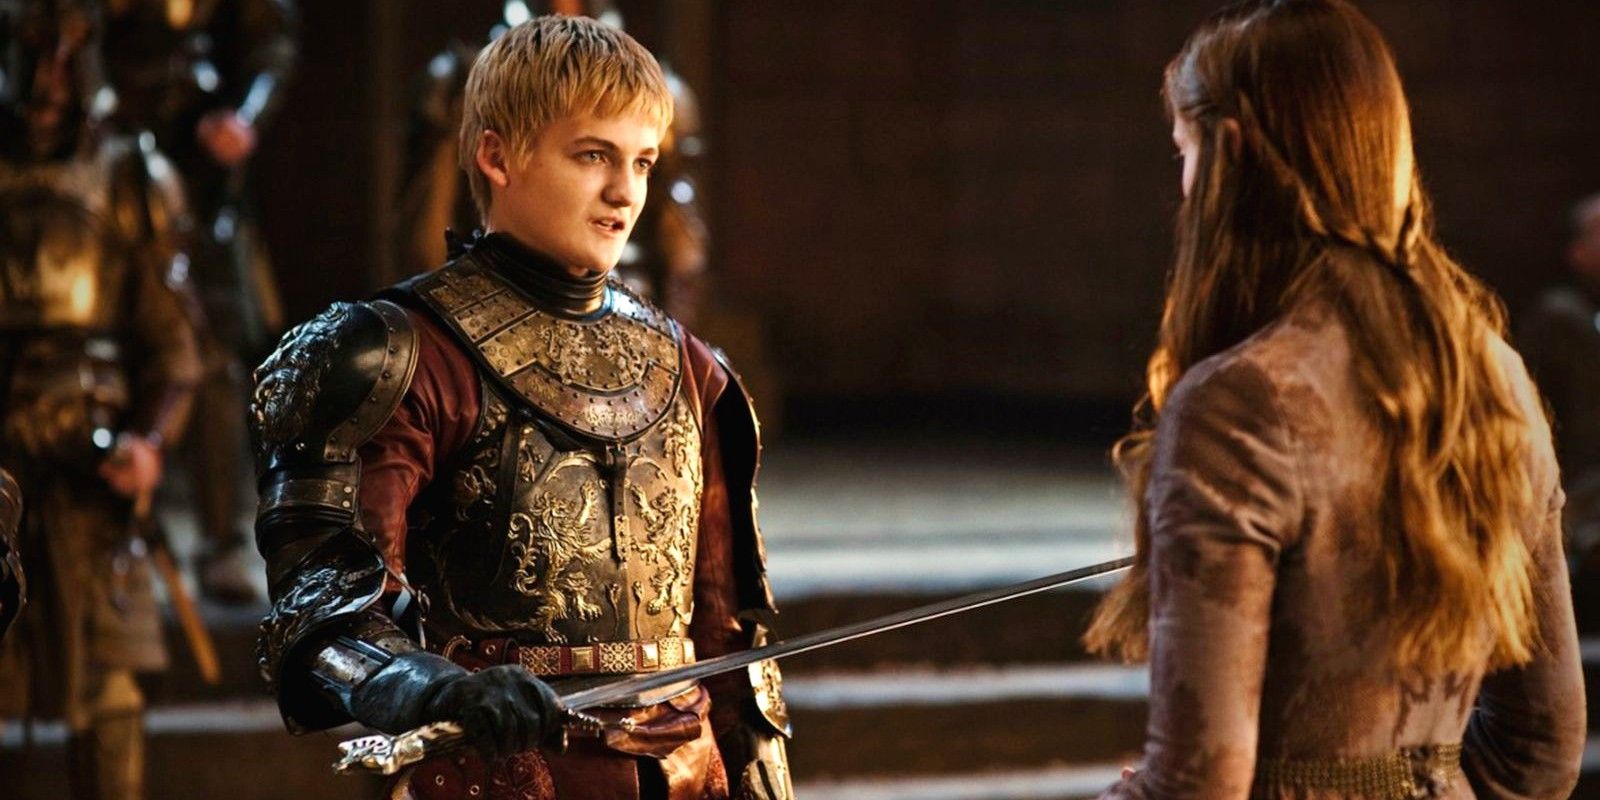 Jack Gleeson as Joffrey holding a sword out for Sansa to kiss on Game of Thrones